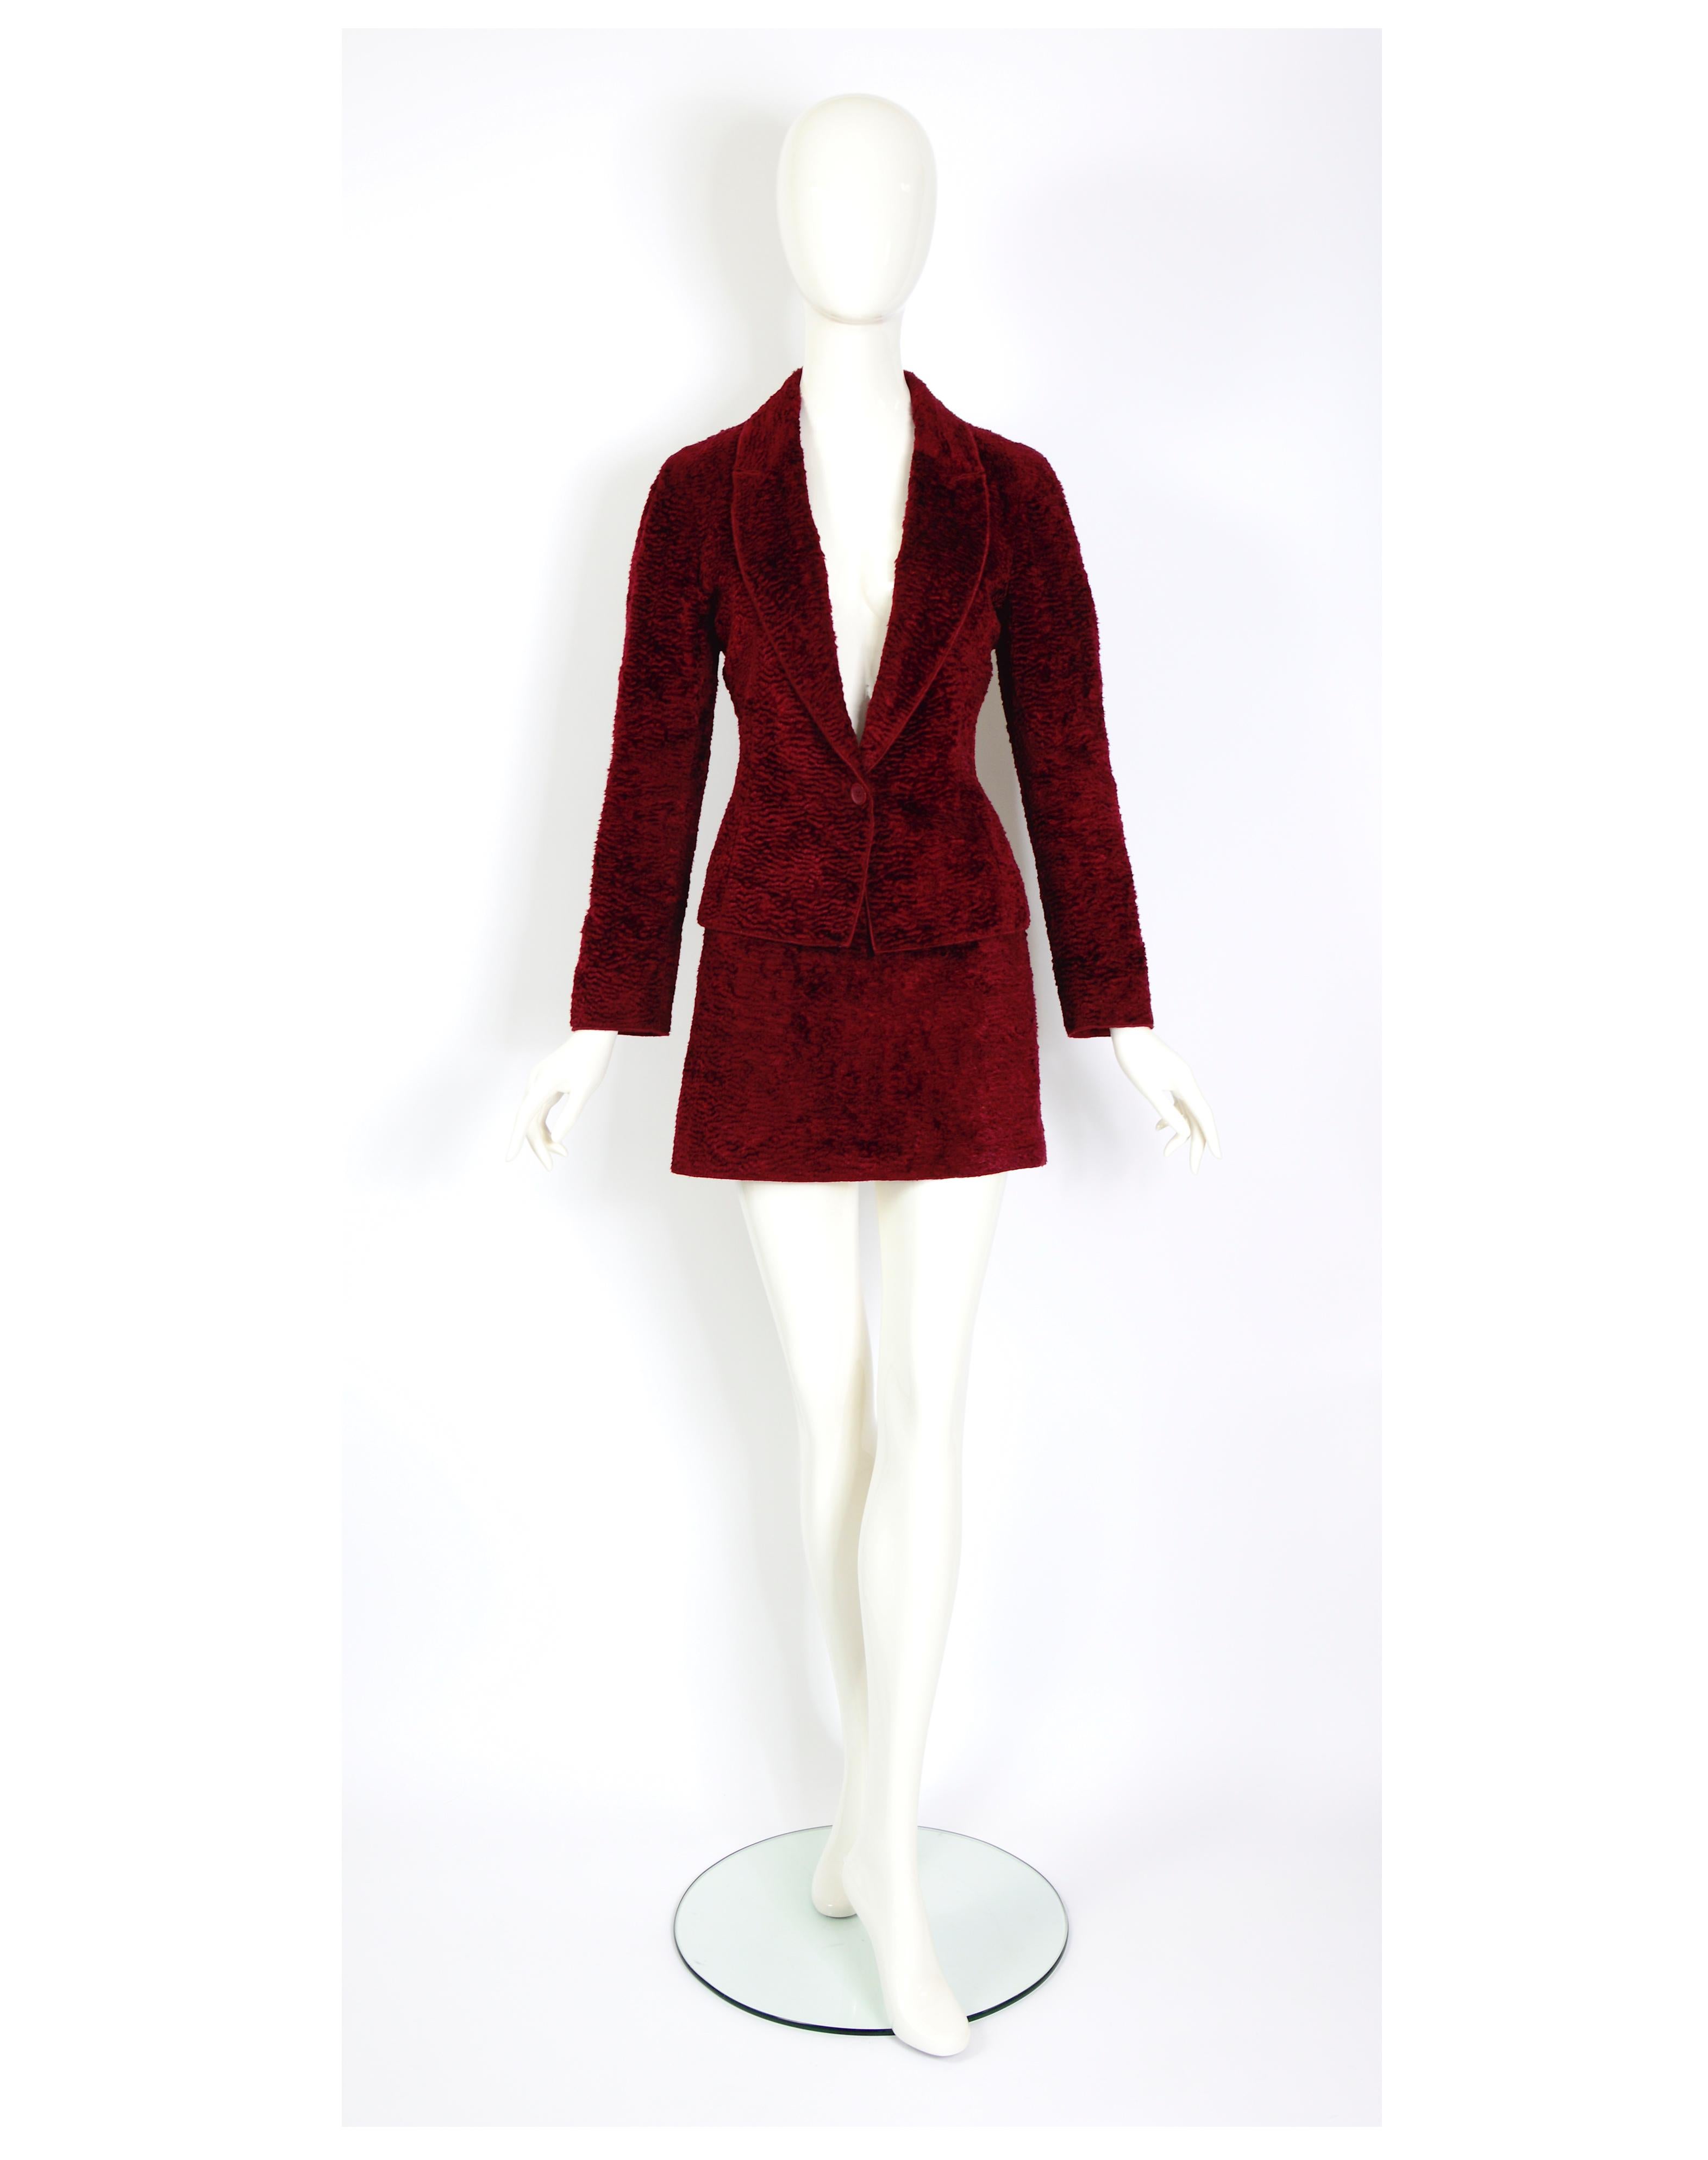 Verlaine Vintage presents an exquisite and timeless Ozbek by Rifat Ozbek's vintage 1990s tailored jacket and mini a-line skirt suit, made in a rich burgundy light cotton velvet, emulating faux Astrakhan fur.

Made in Italy.
The skirt and jacket are: